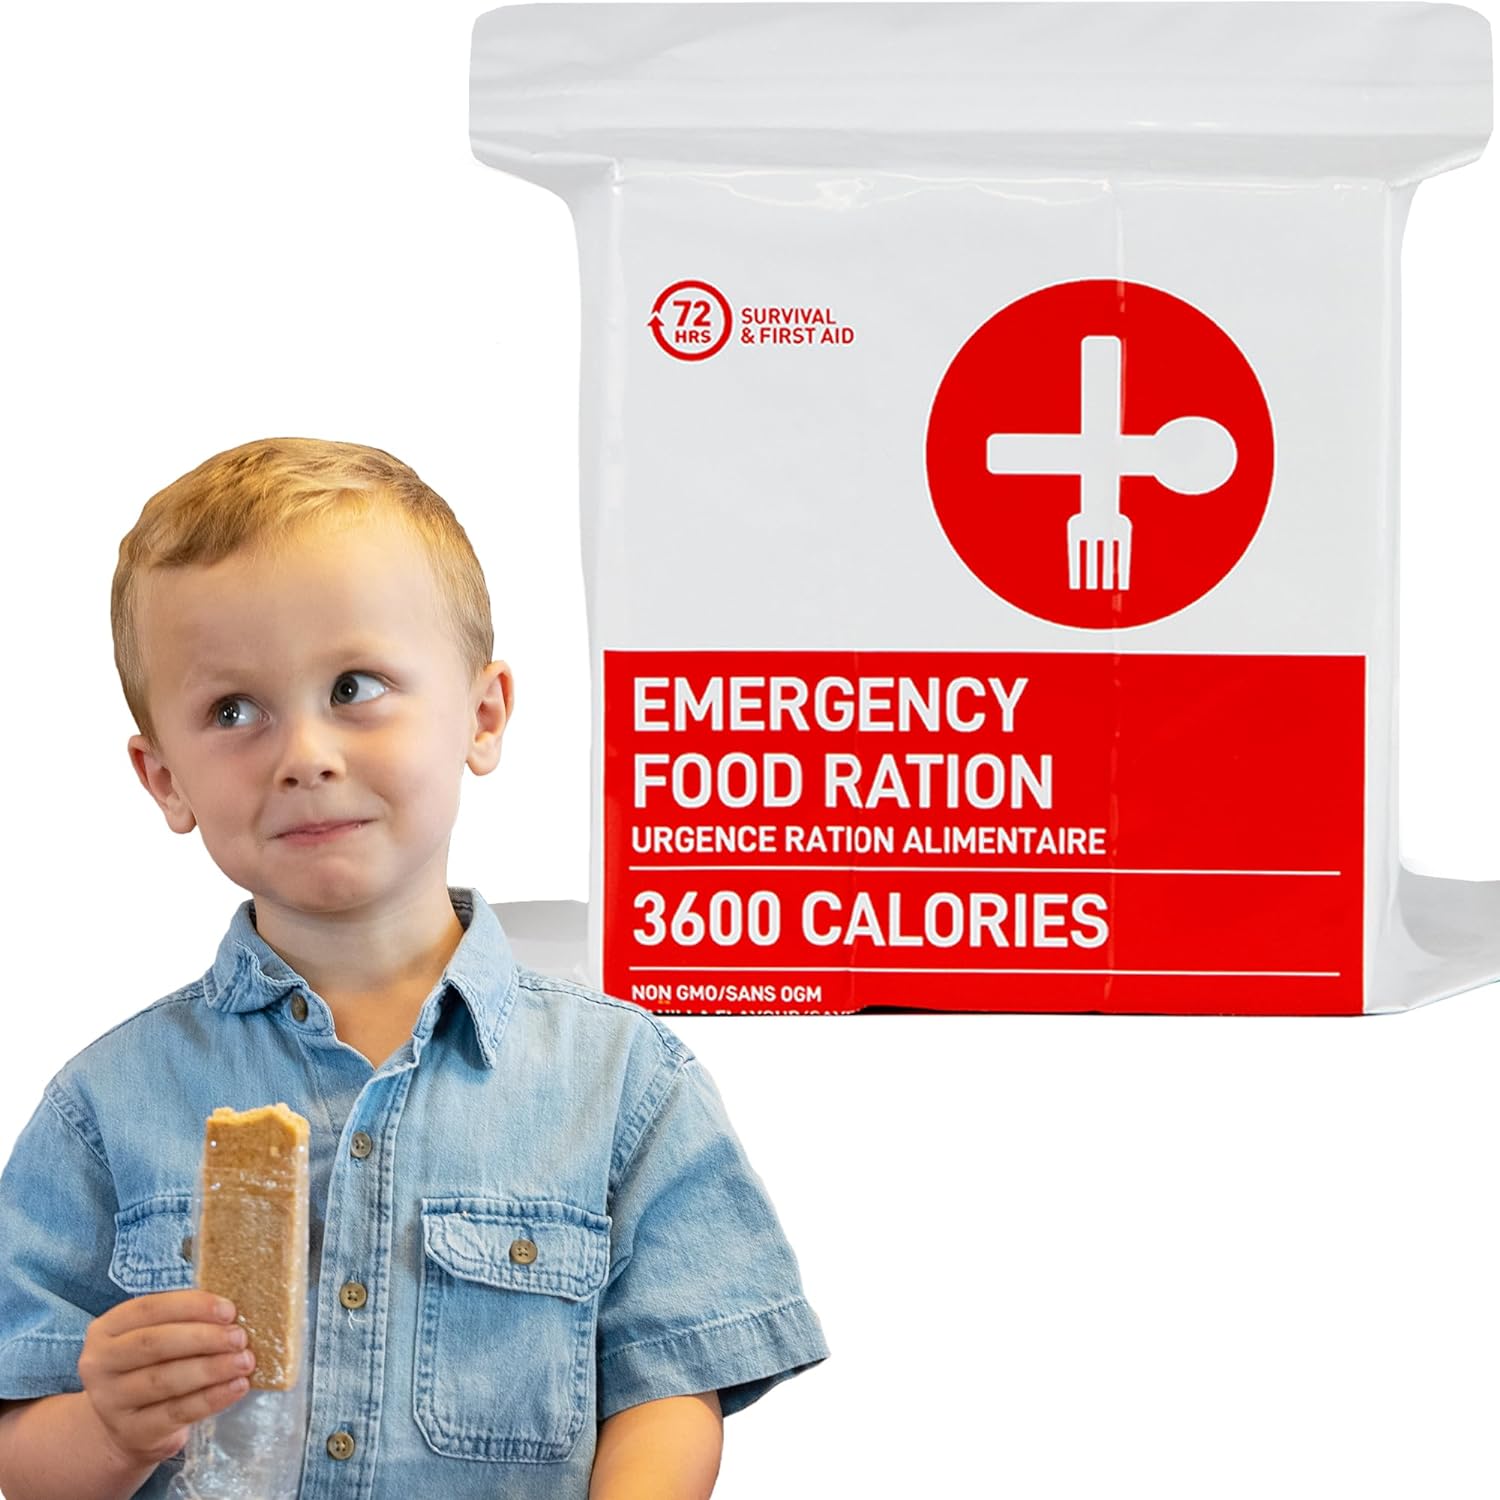 72 HRS Food Rations, Emergency Food Rations, Rations Emergency 3600 Calories for 72 Hours, 5 – Year Shelf Life, Emergency Food